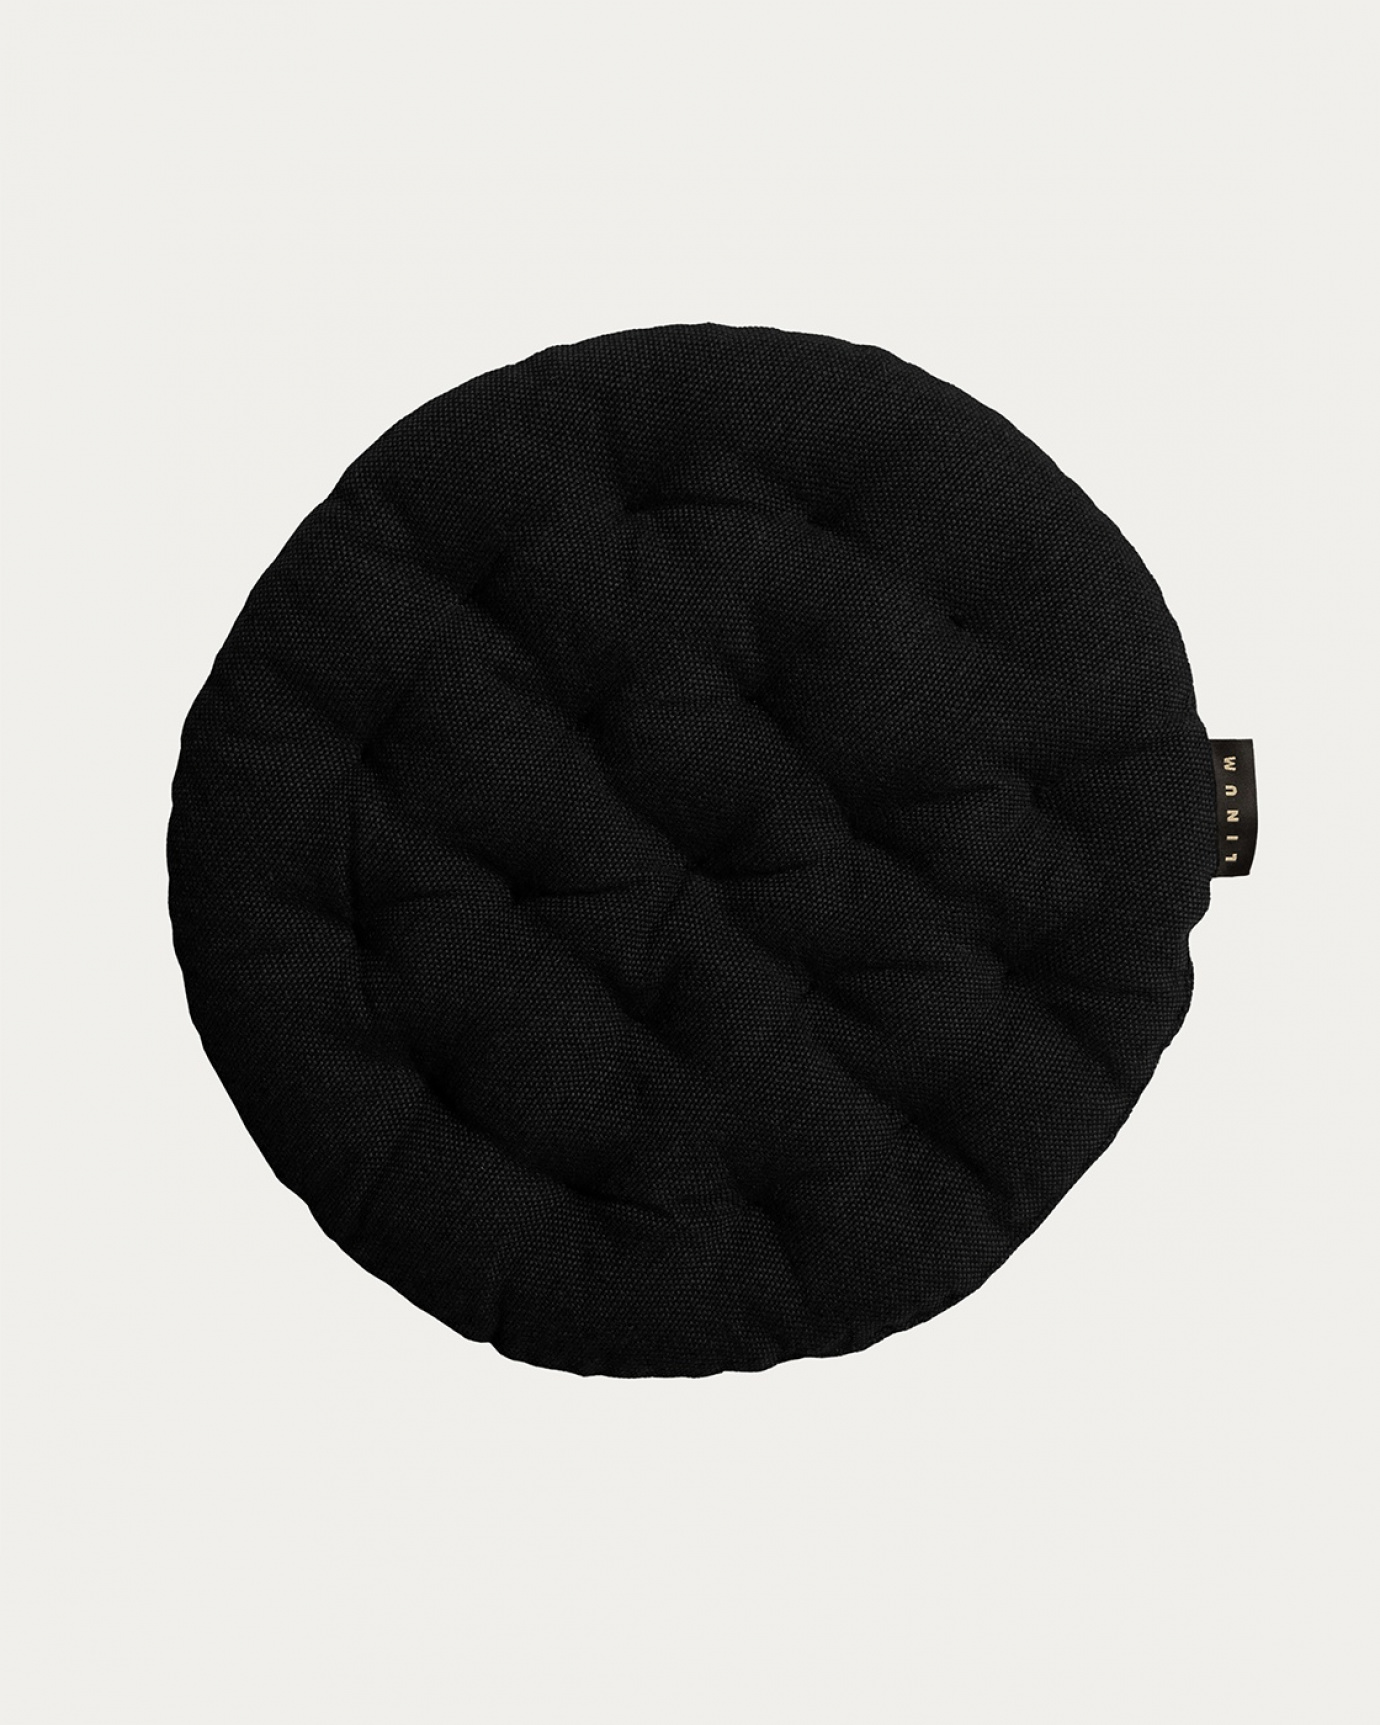 Product image black PEPPER seat cushion made of soft cotton with recycled polyester filling from LINUM DESIGN. Size ø37 cm.